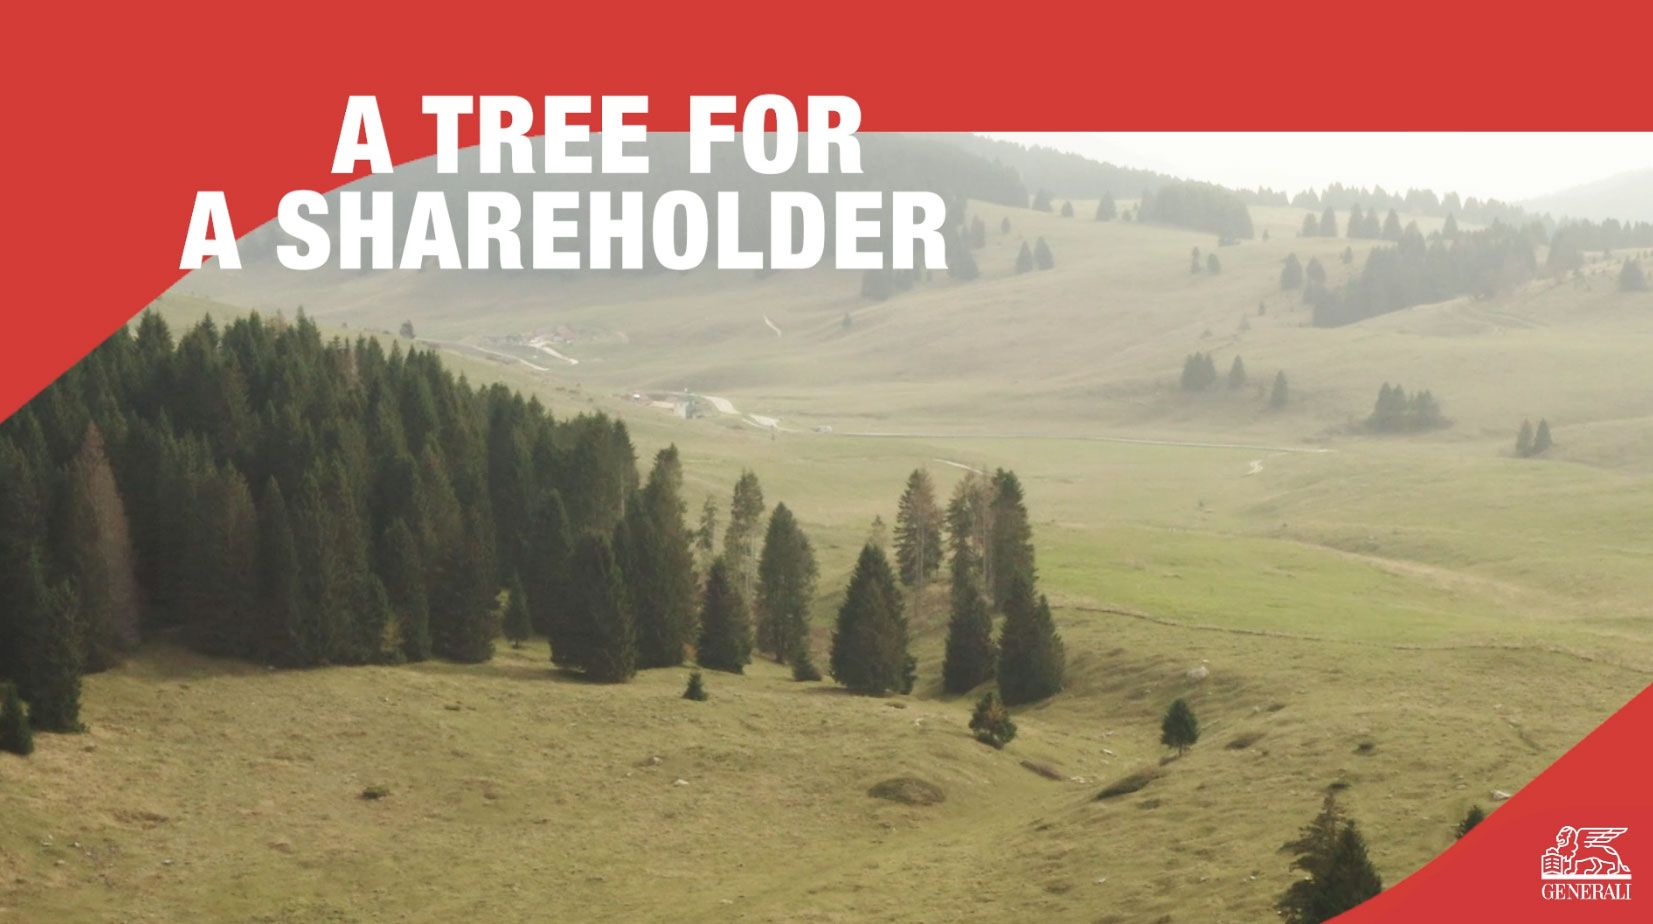 A tree for a shareholder - edition 2022